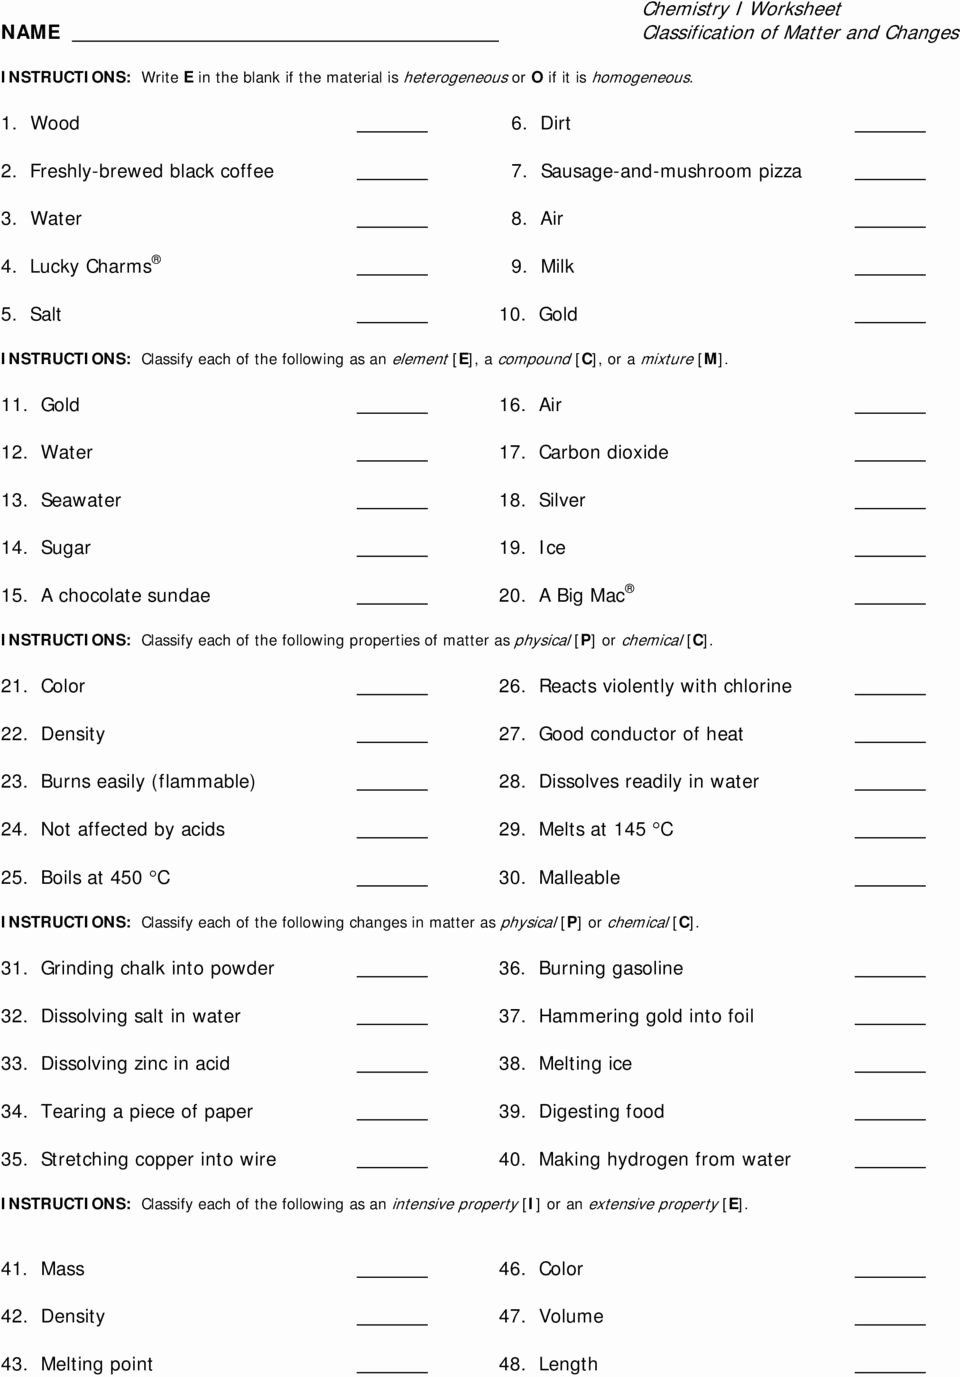 Worksheet Classification Of Matter 50 Classifying Matter Worksheet Answers In 2020